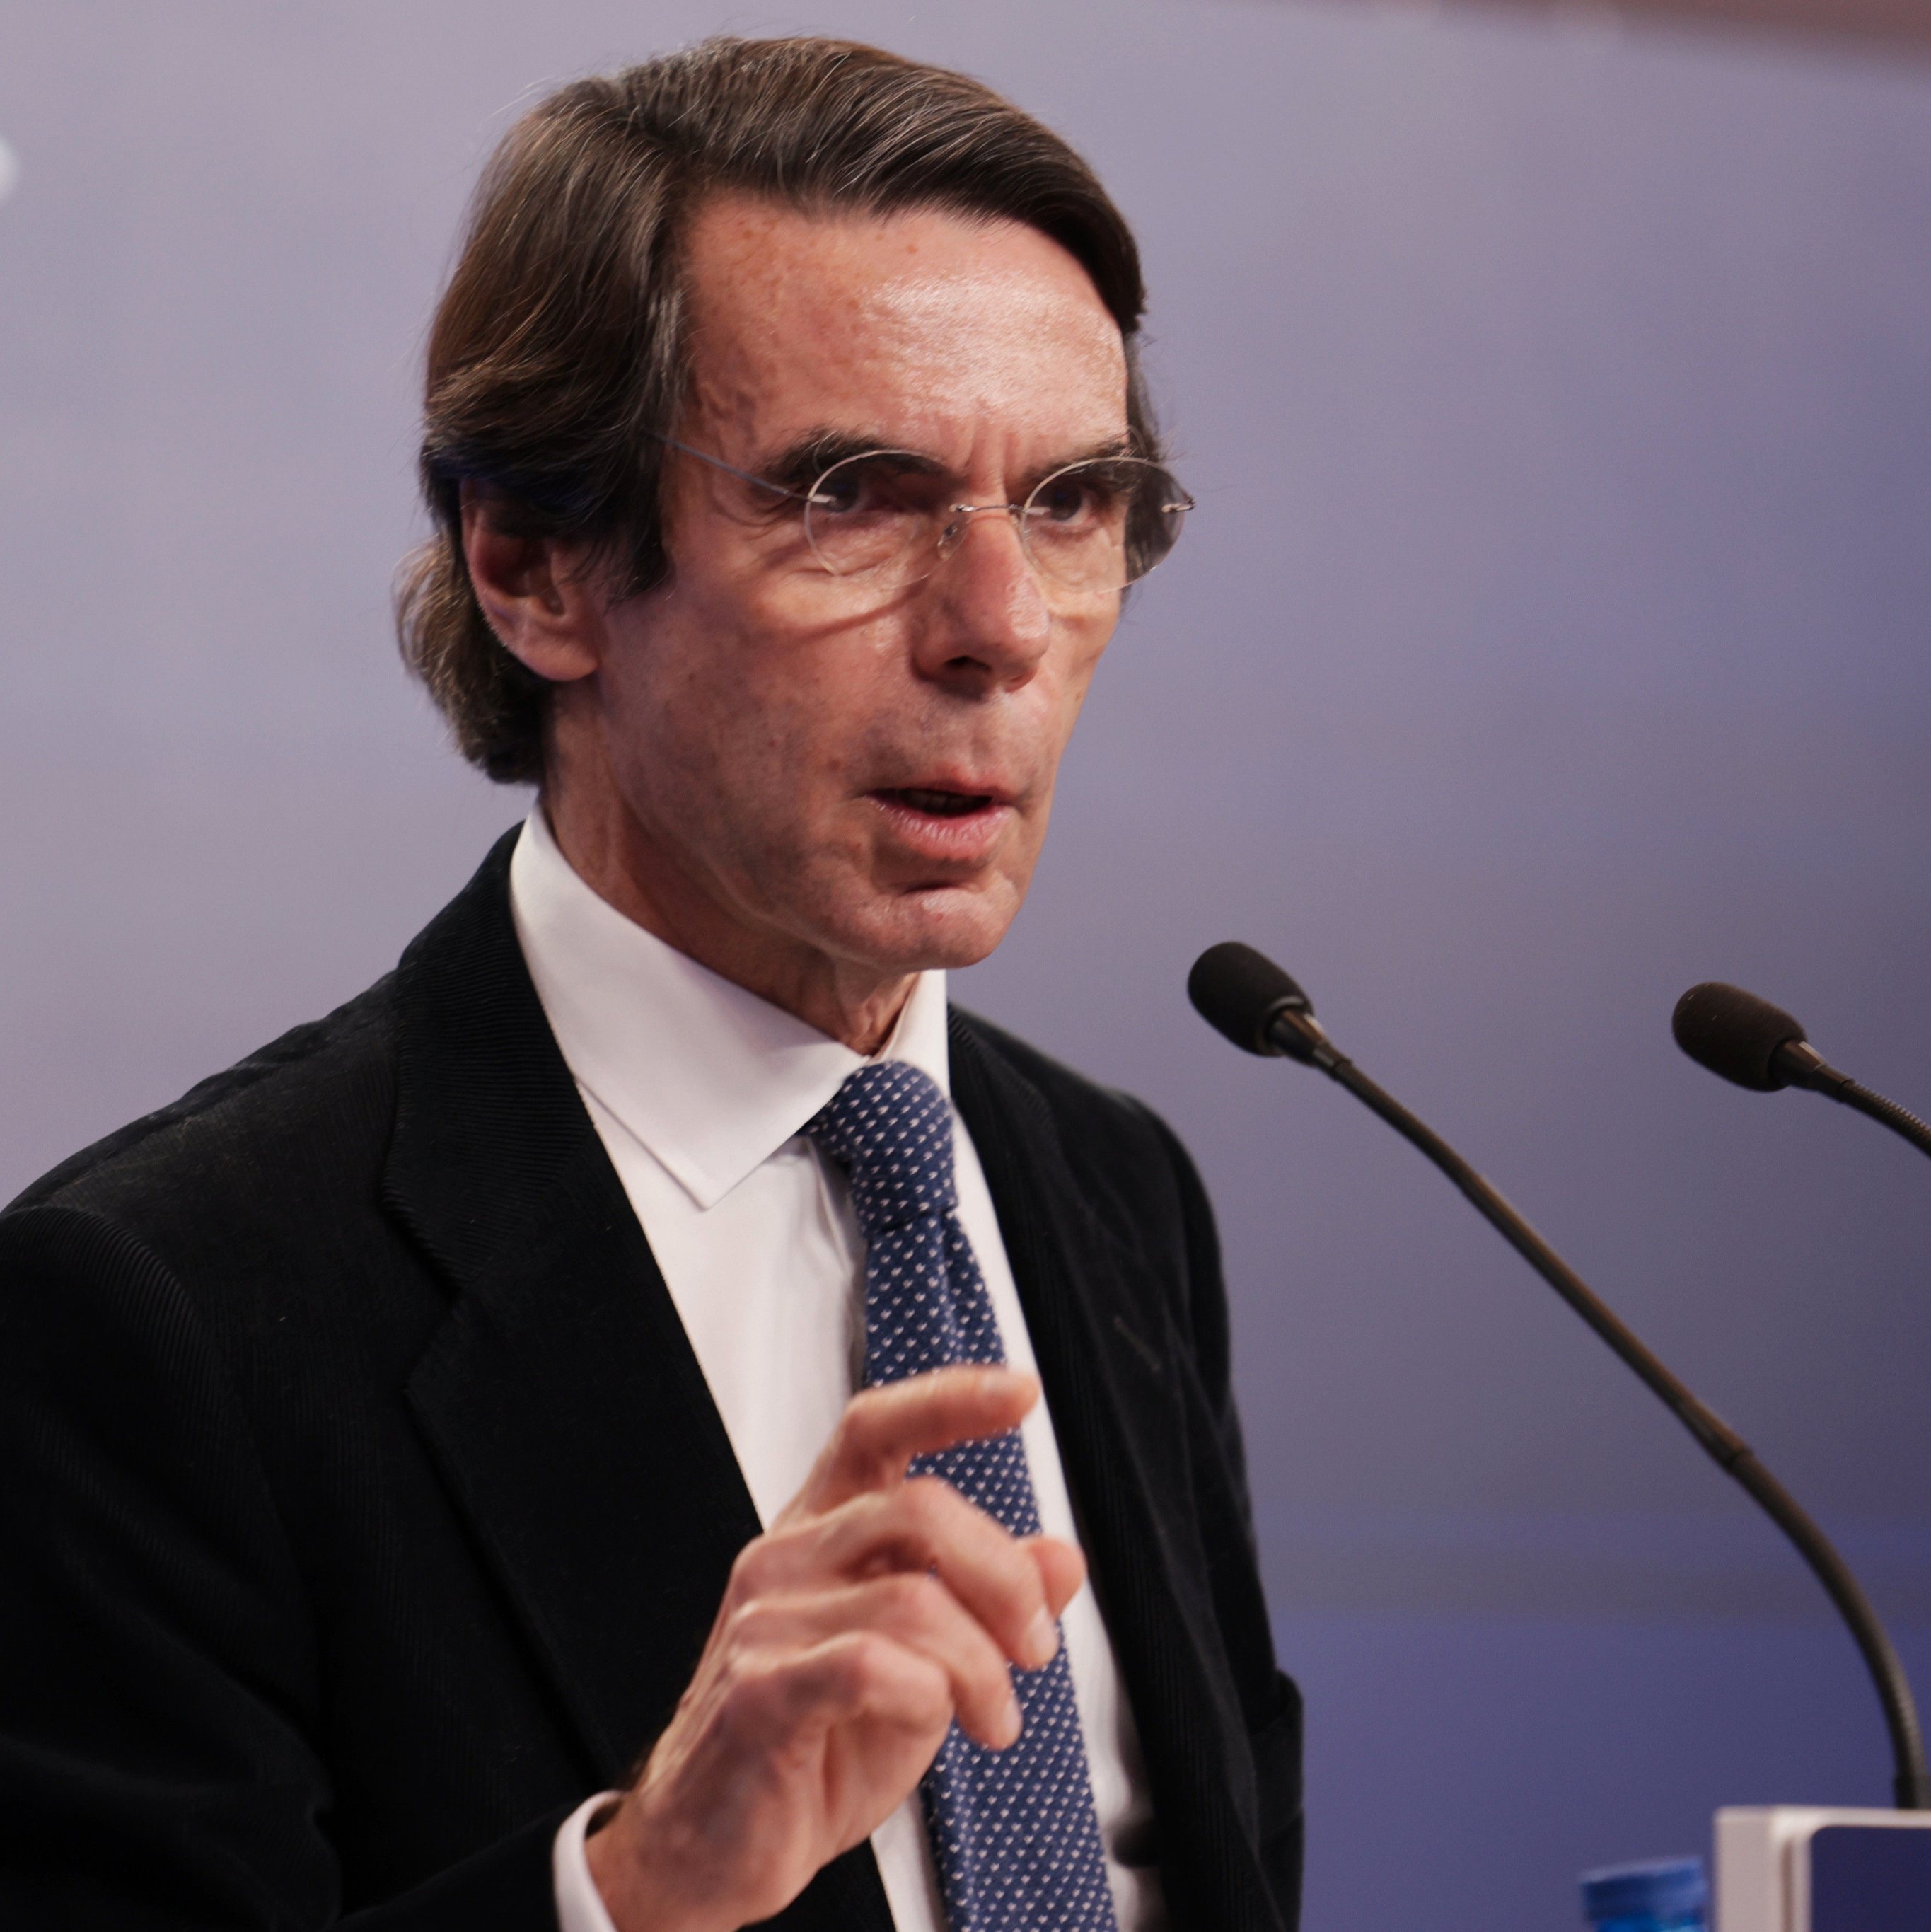 Aznar Travels To Valladolid To Support Mañueco In His Election Campaign